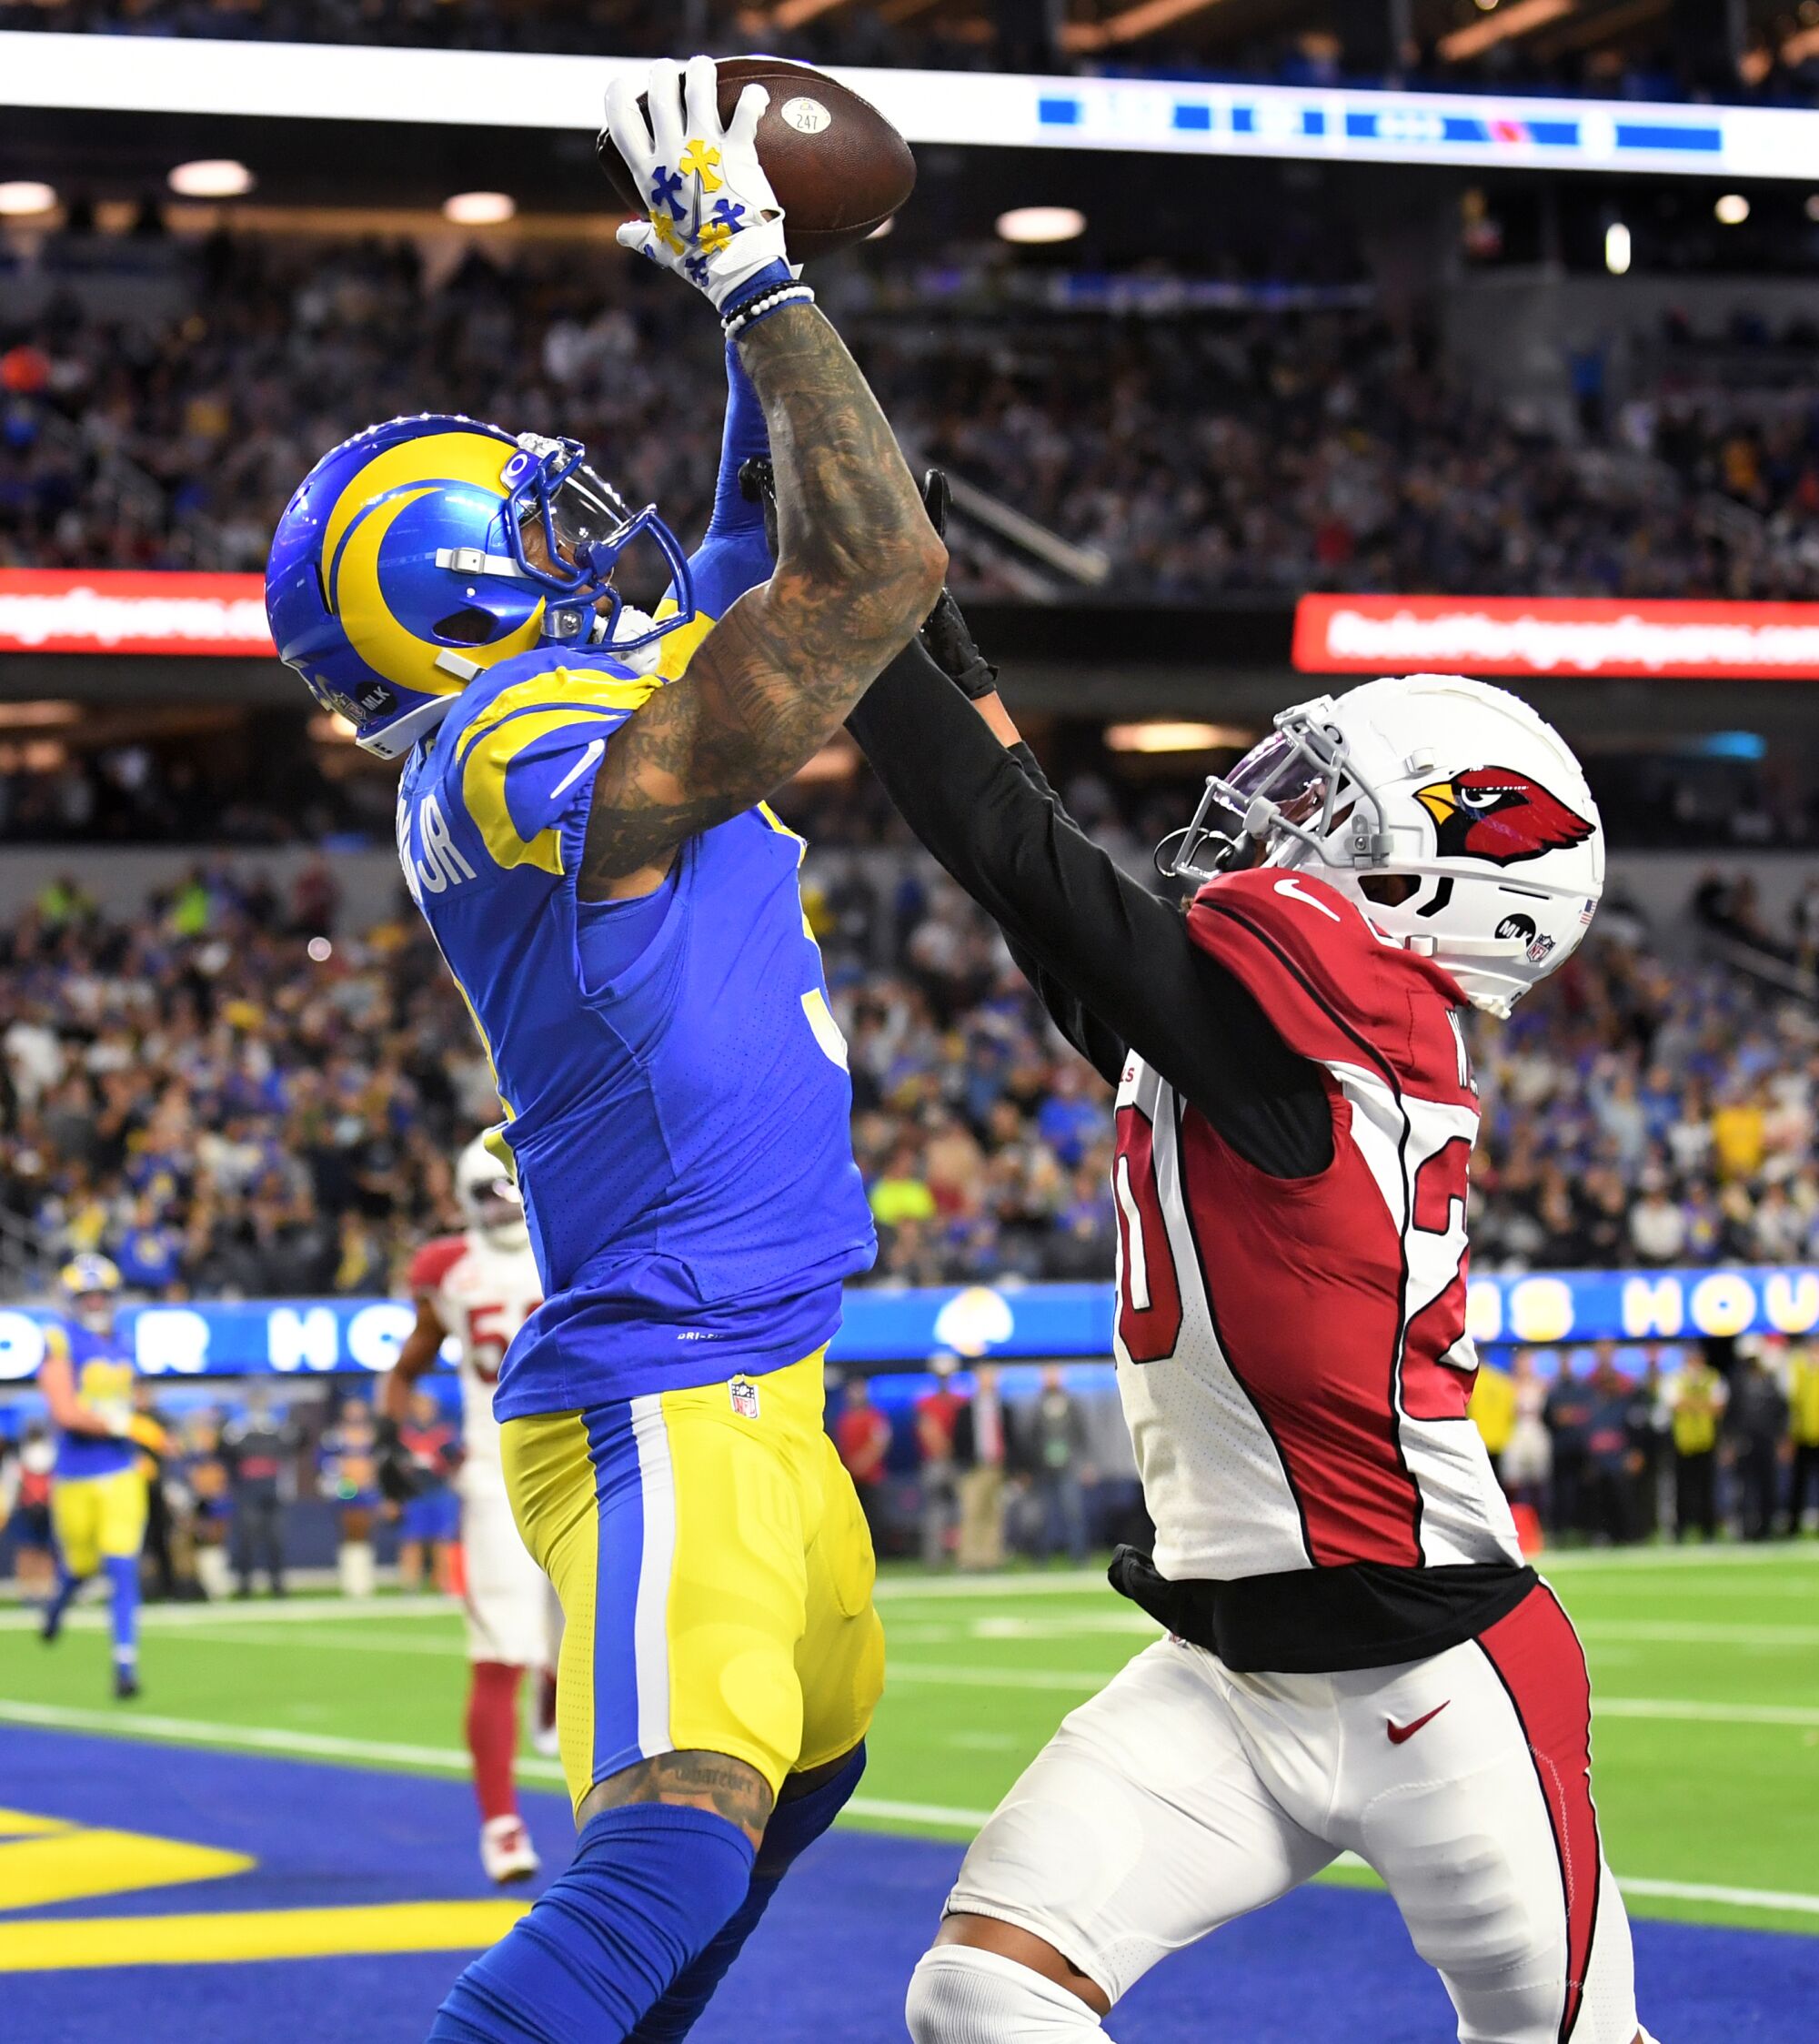 Rams receiver Odell Beckham Jr. catches a touchdown pass in front of Cardinals cornerback Marco Wilson.